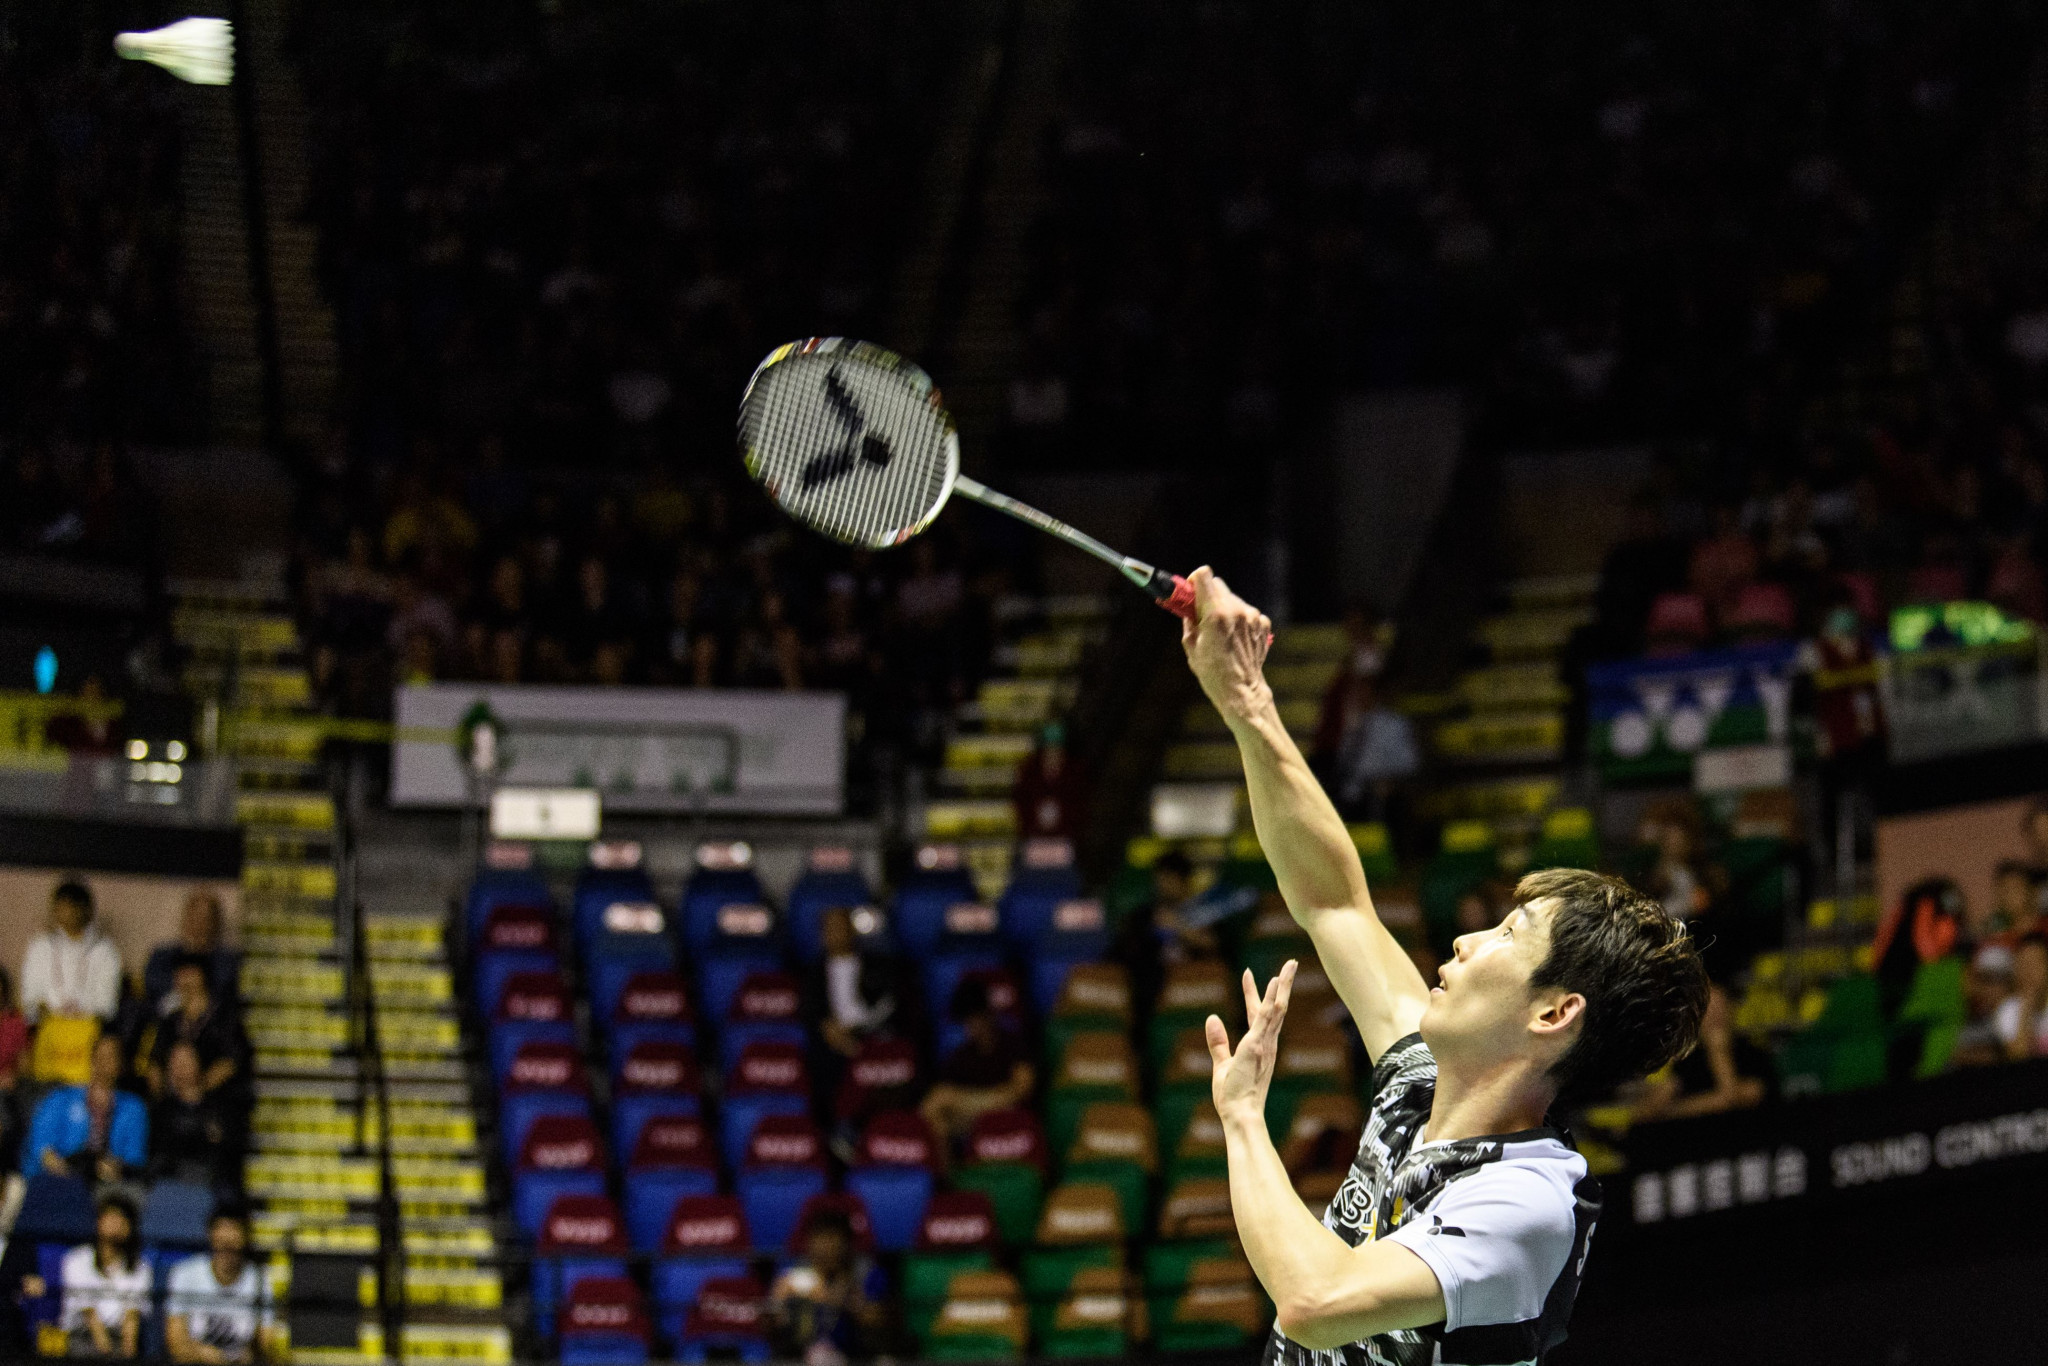 Top seed Son Wan Ho has moved one step closer to a home triumph at the Badminton World Federation Korea Masters in Gwangju ©Getty Images